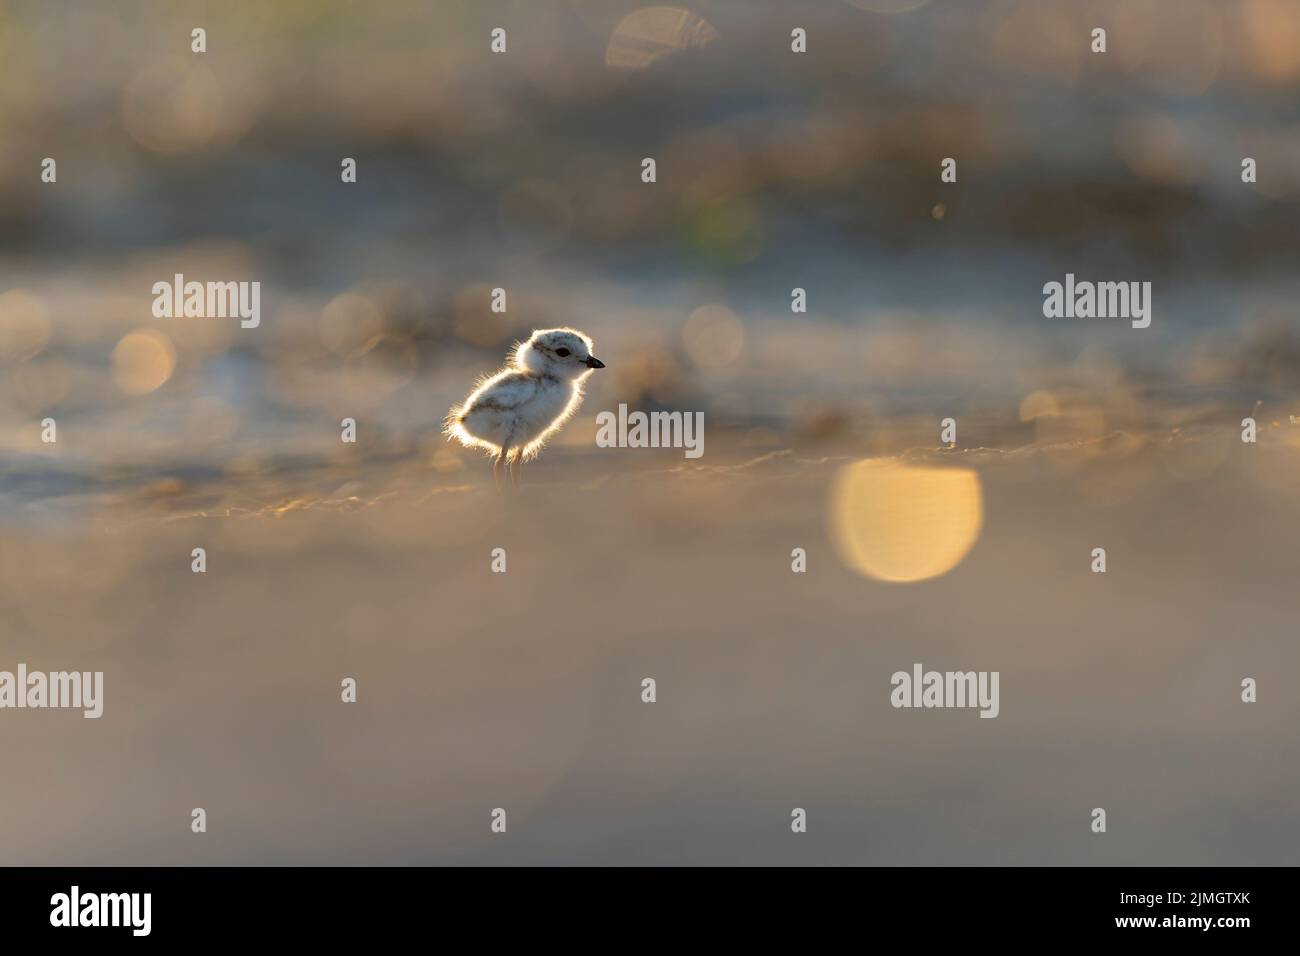 A piping plover (Charadrius melodus) fledgling foraging back lit in the morning sun on the beach. Stock Photo